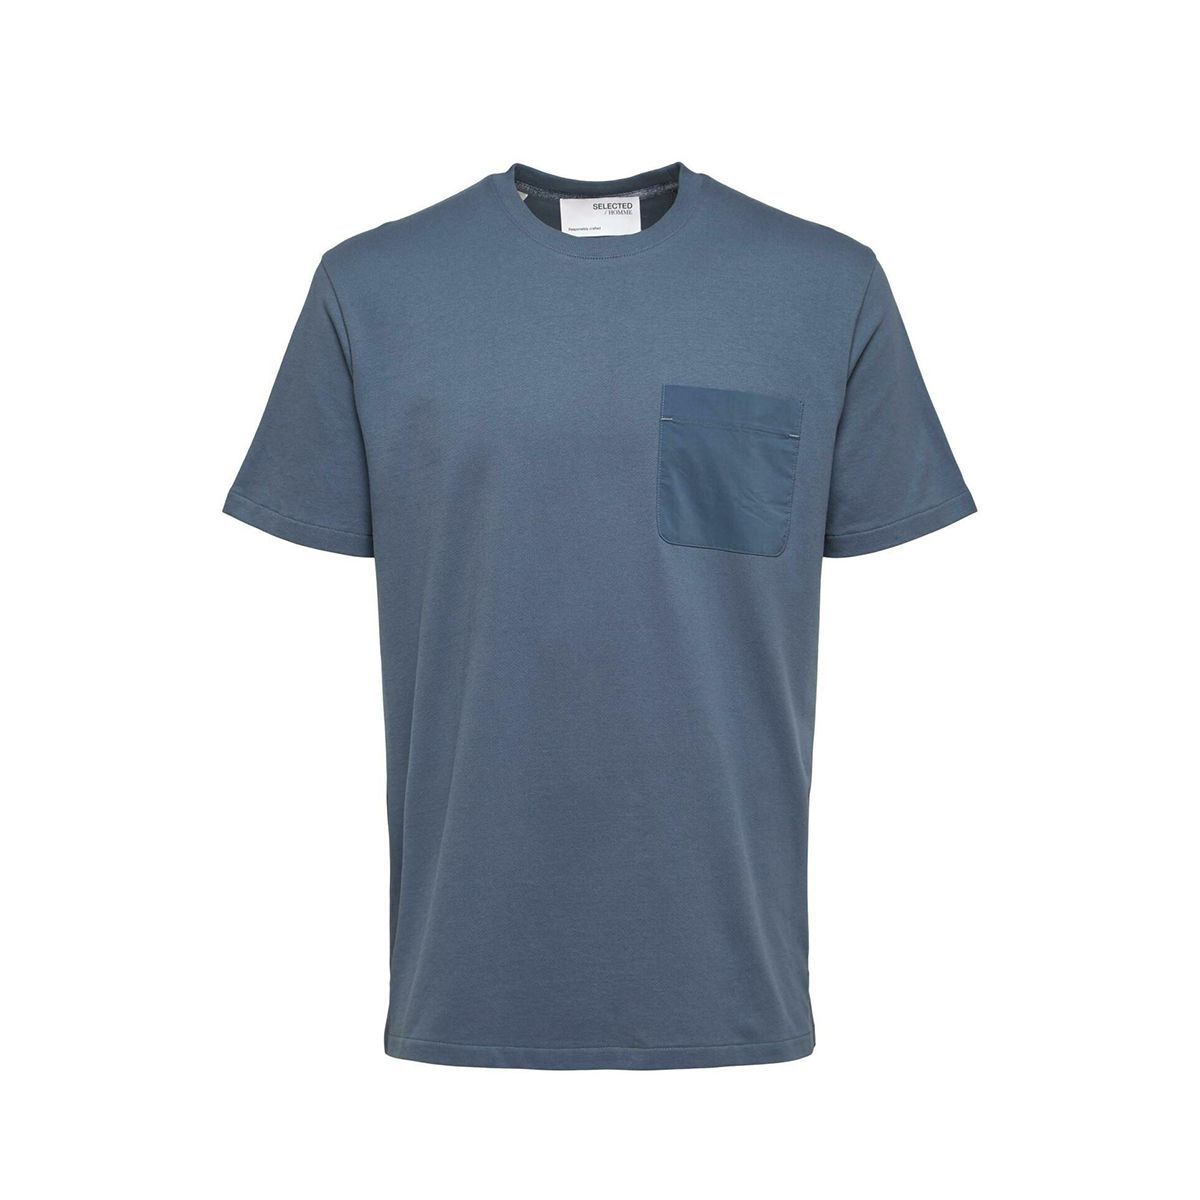 Blue T-Shirt With Patch Pocket